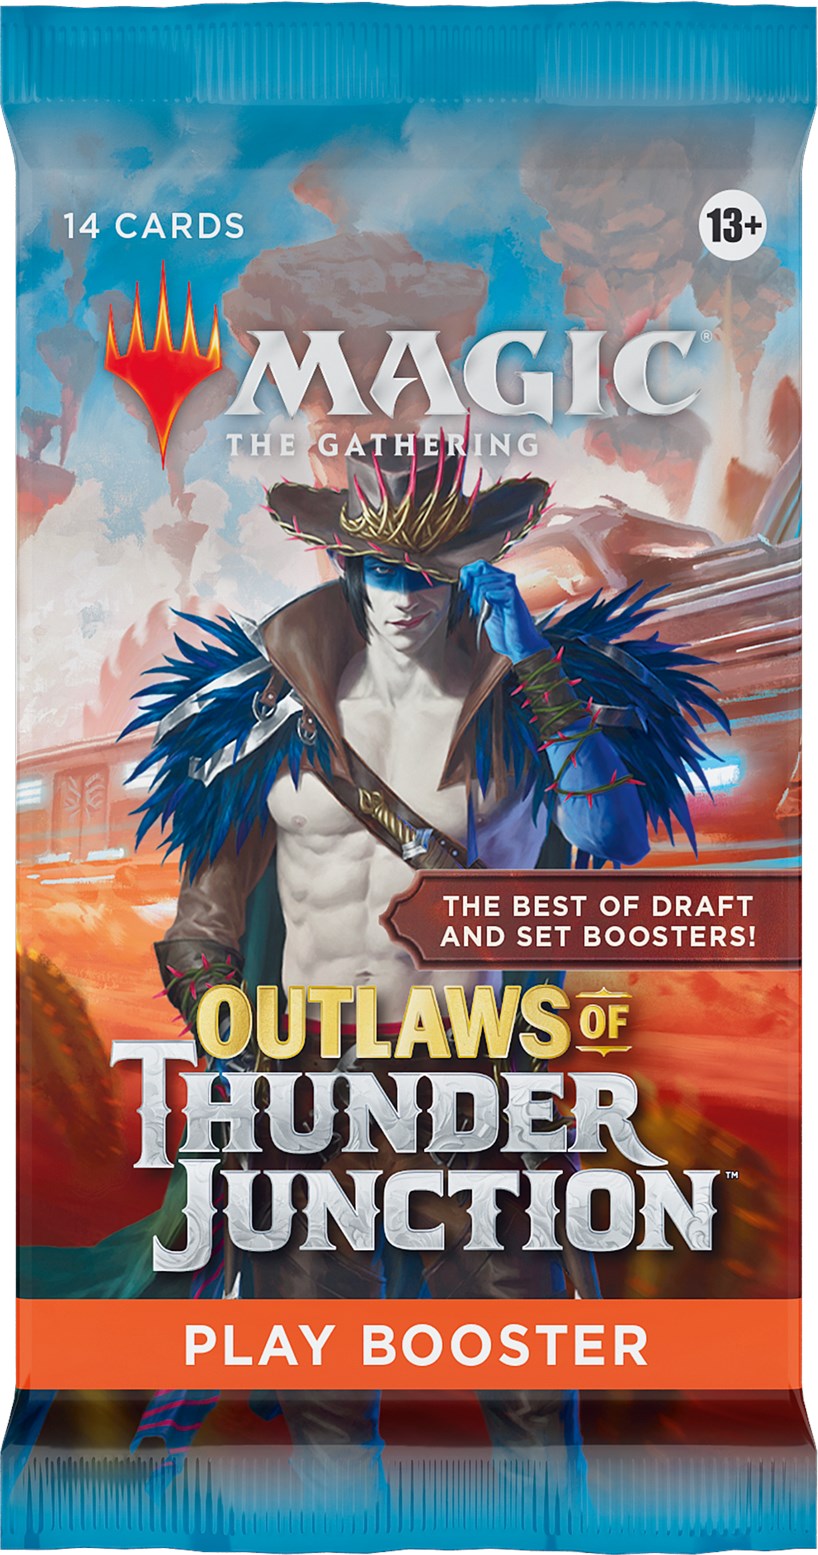 Outlaws of Thunder Junction - Play Booster Pack | Shuffle n Cut Hobbies & Games